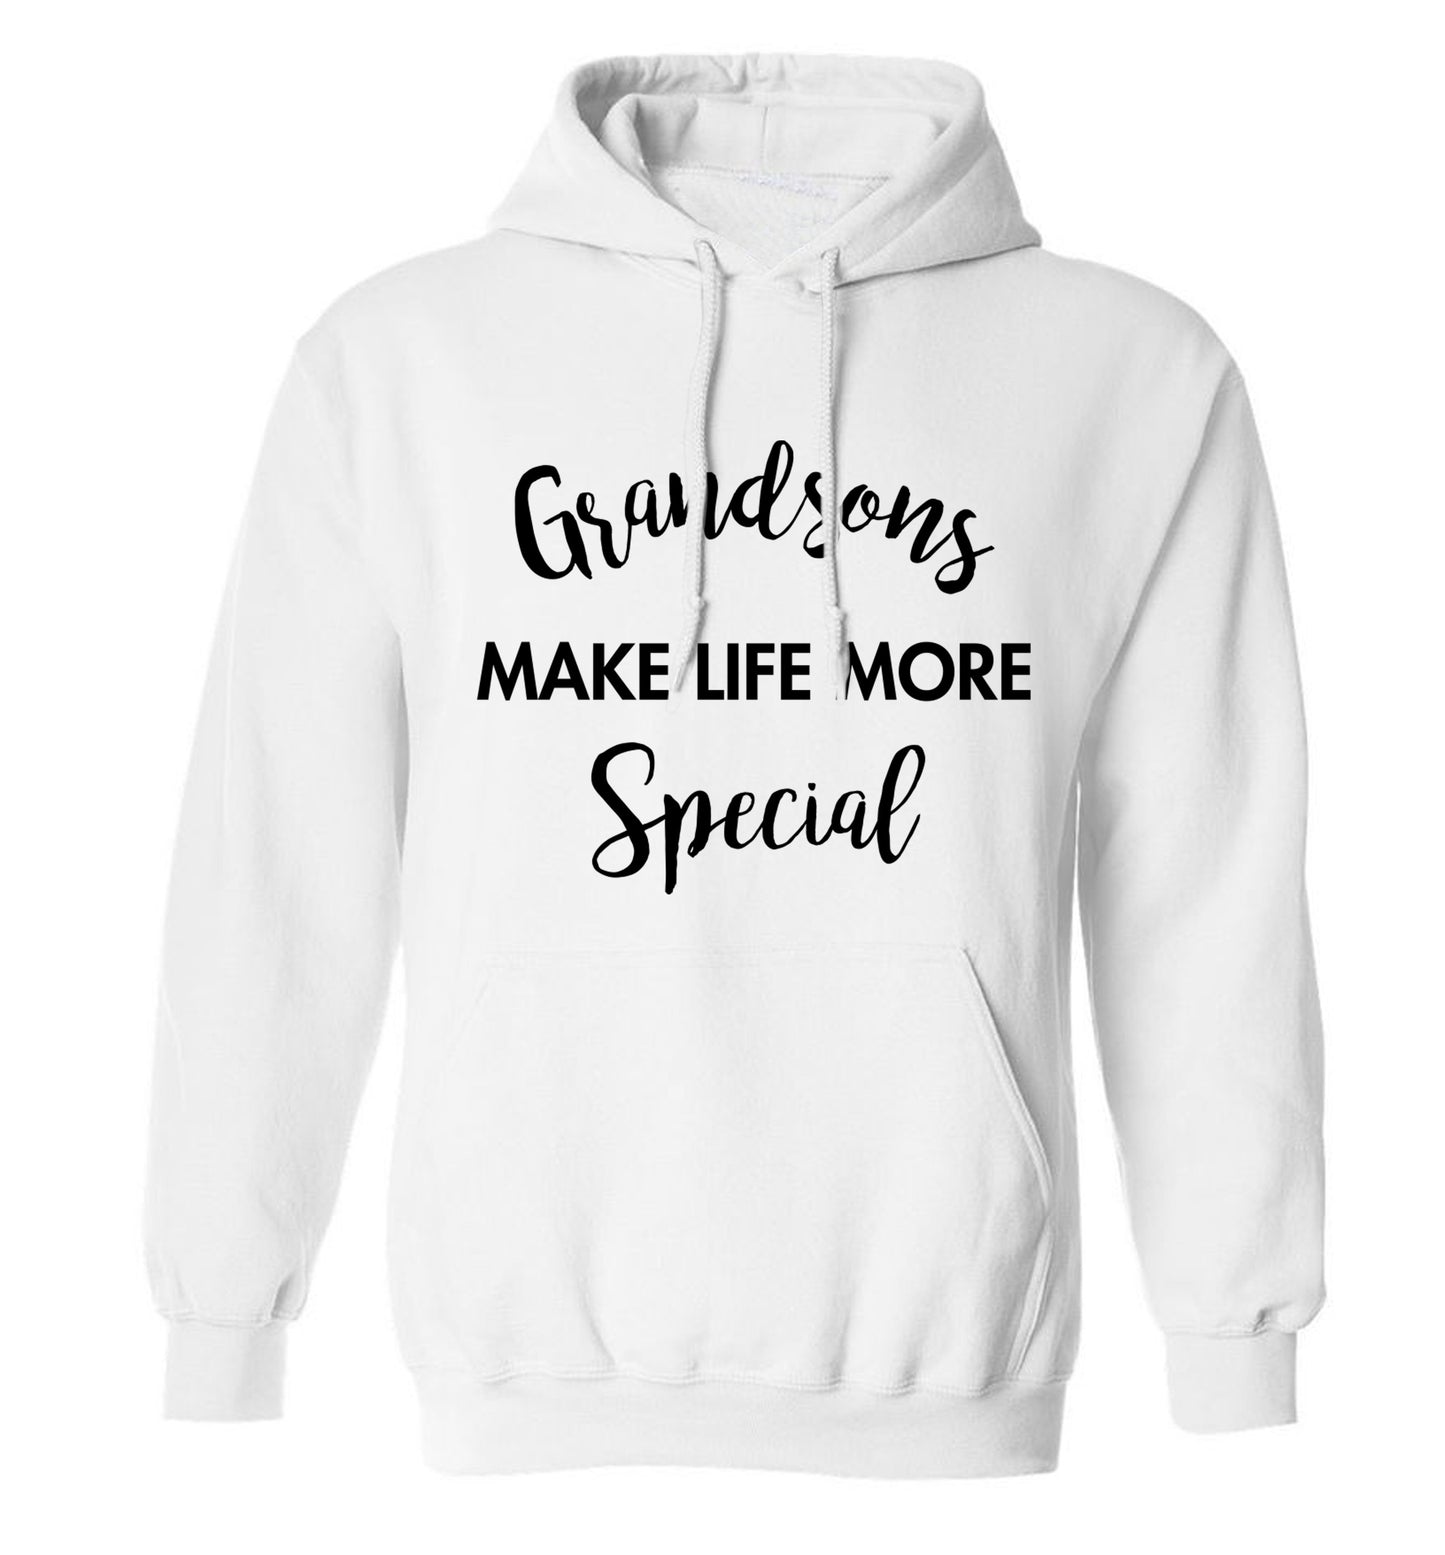 Grandsons make life more special adults unisex white hoodie 2XL